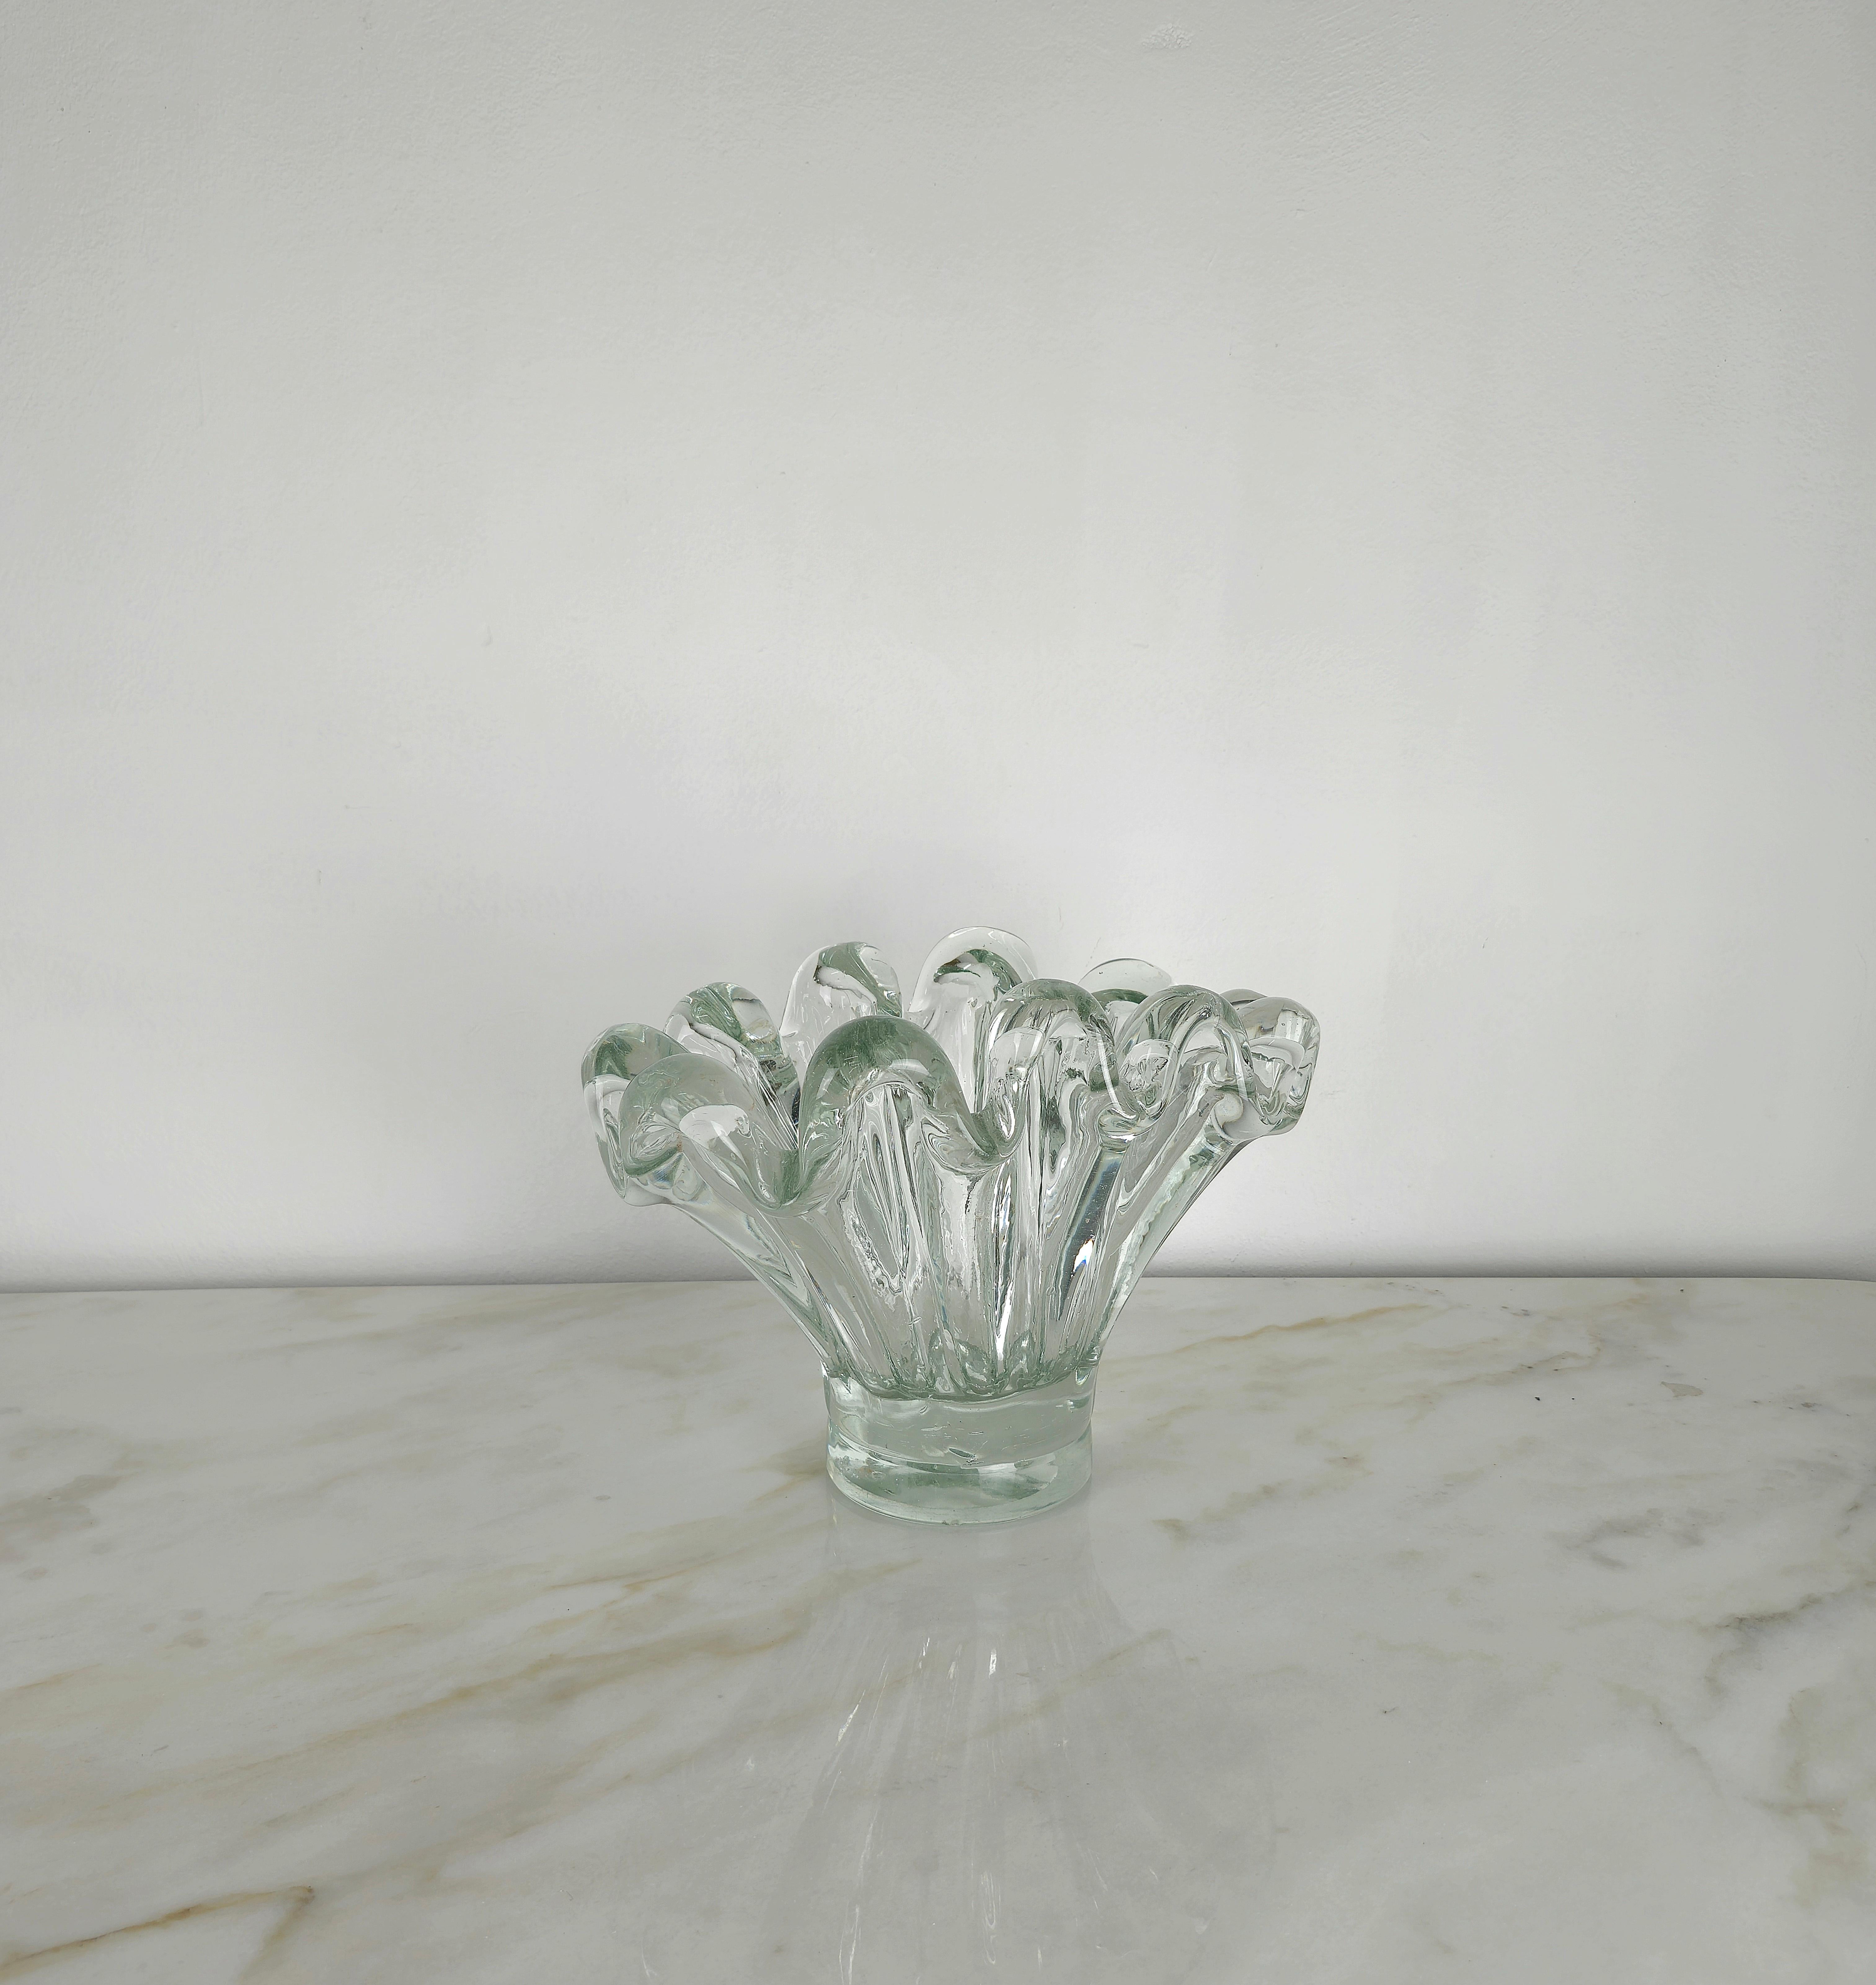 Vase Decorative Object Transparent Murano Glass Large Midcentury Italy 1960s In Good Condition For Sale In Palermo, IT